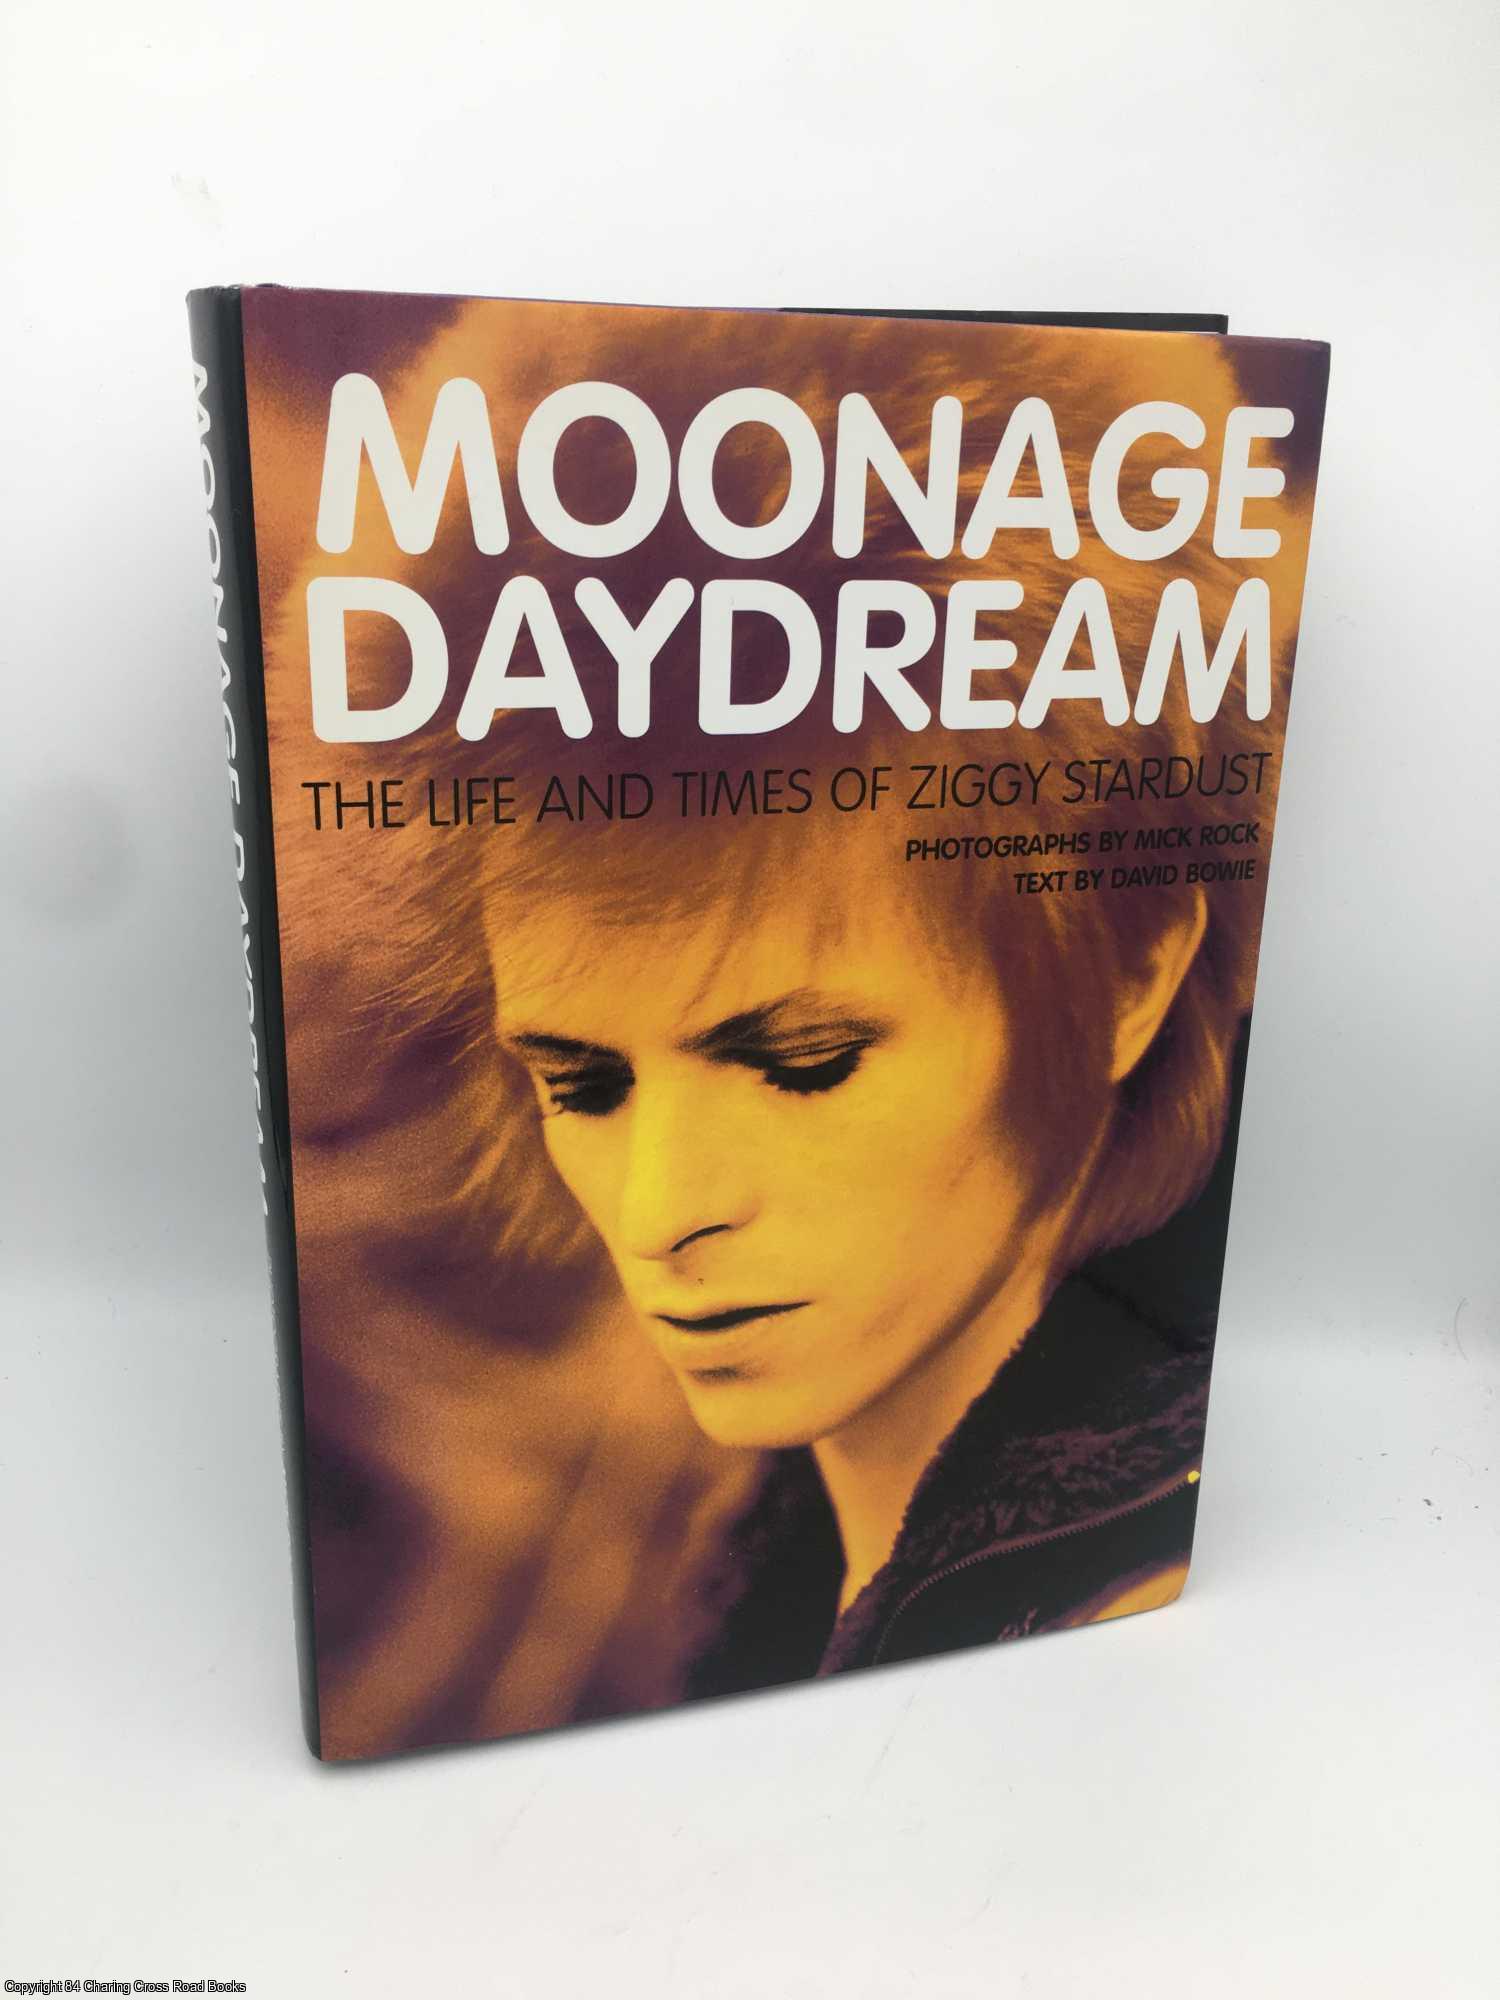 Bowie, David; Rock, Mick - Moonage Daydream: The Life and Times of Ziggy Stardust